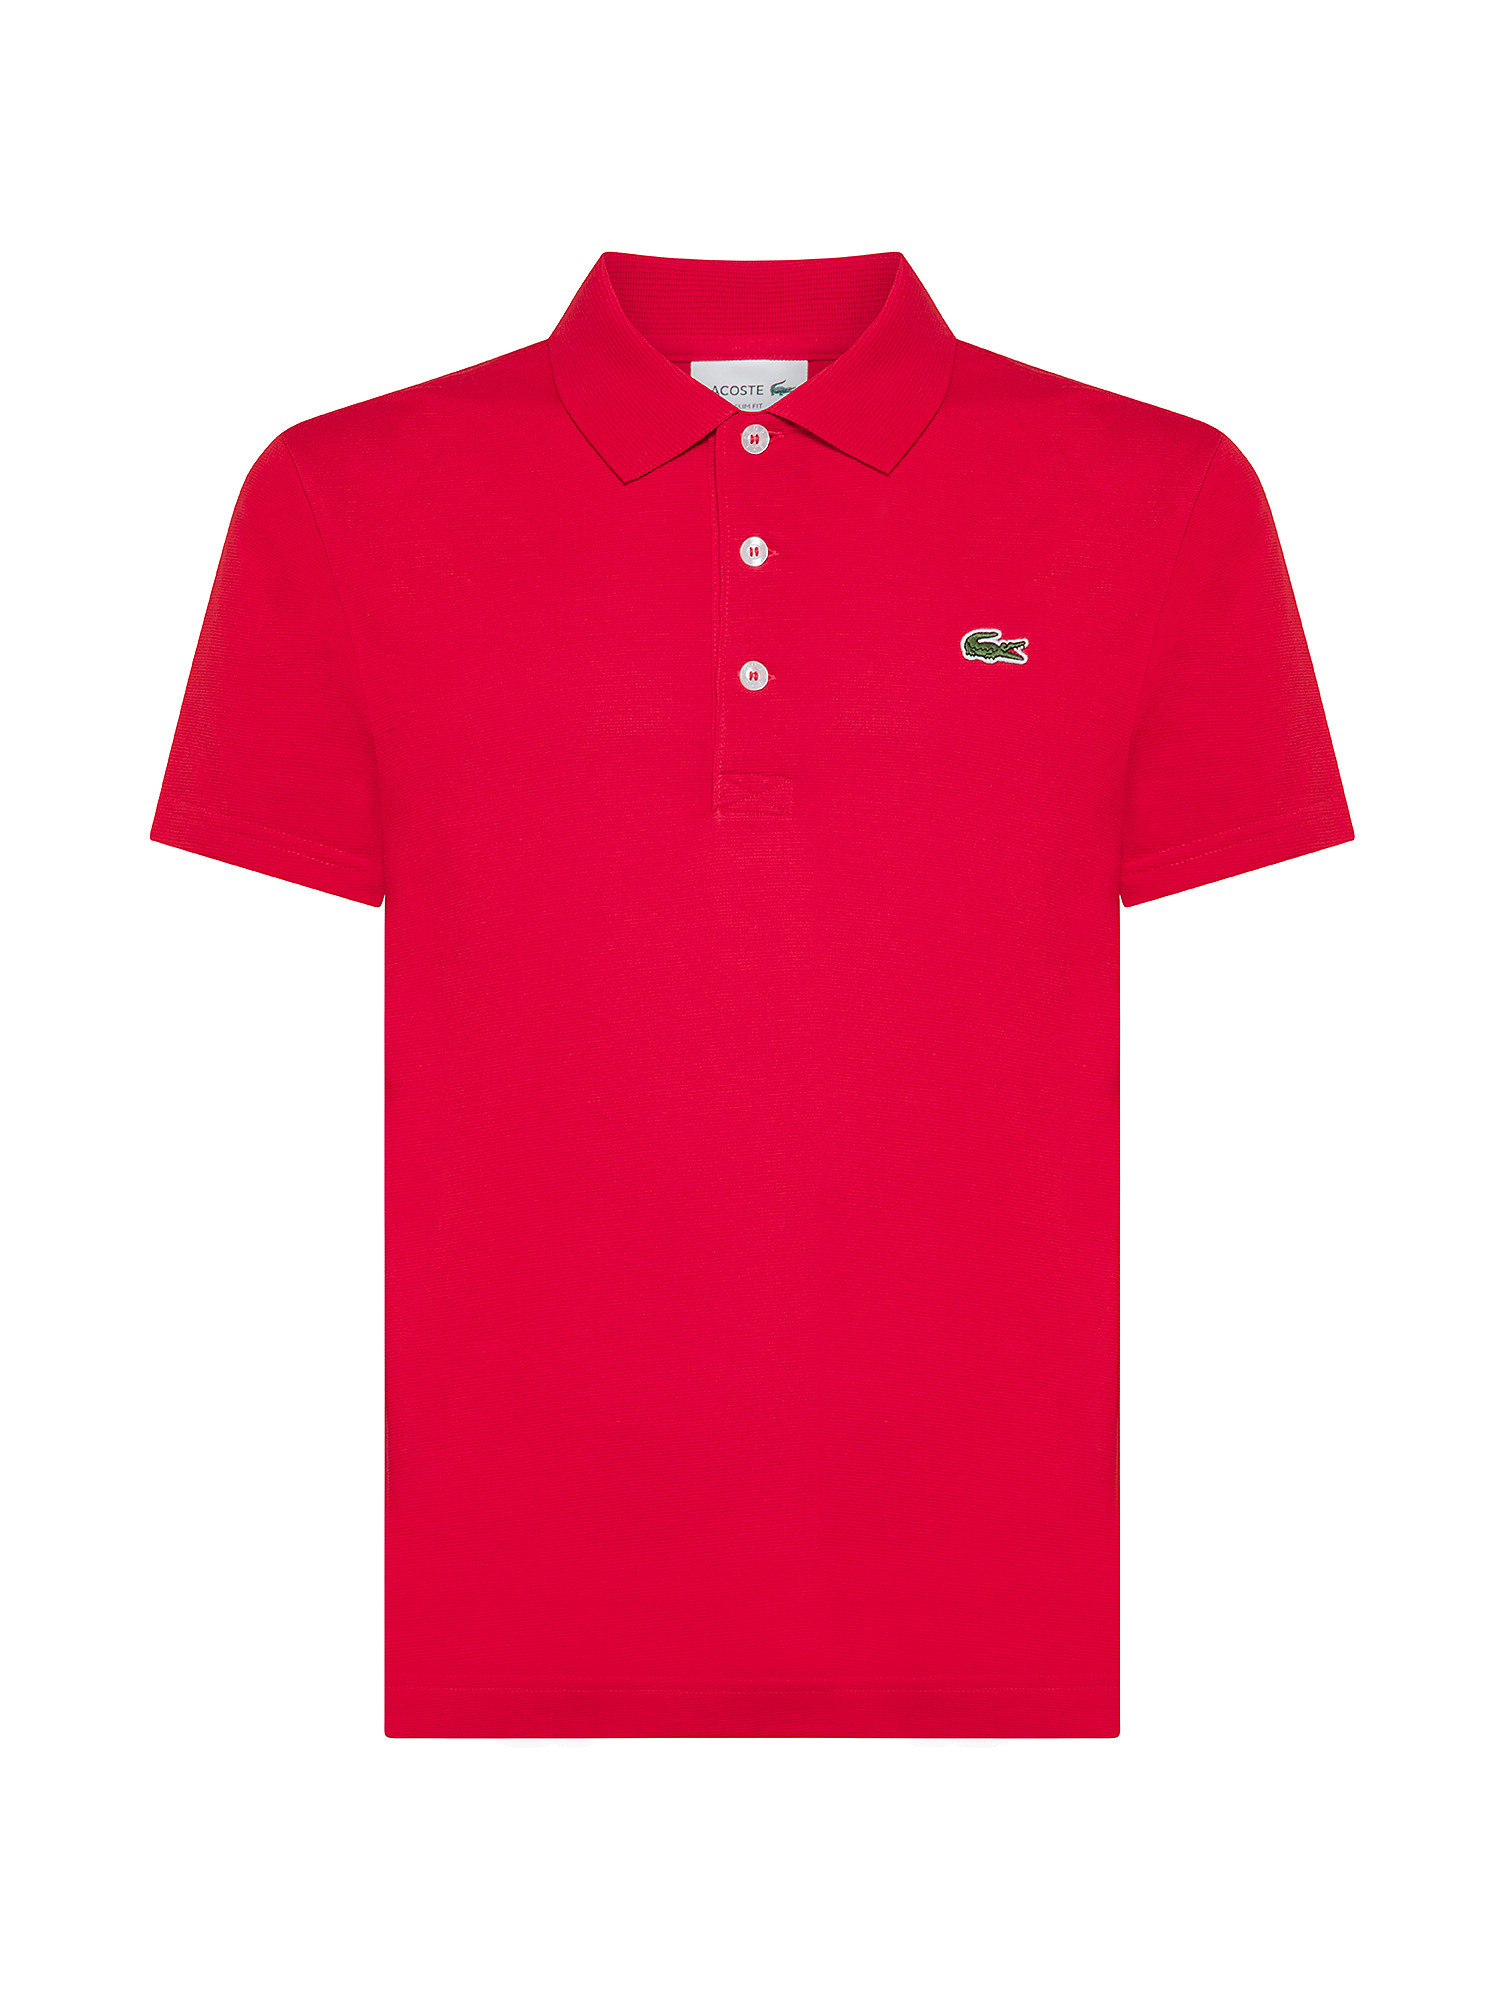 Lacoste - Regular fit stretch polo, Red, large image number 0